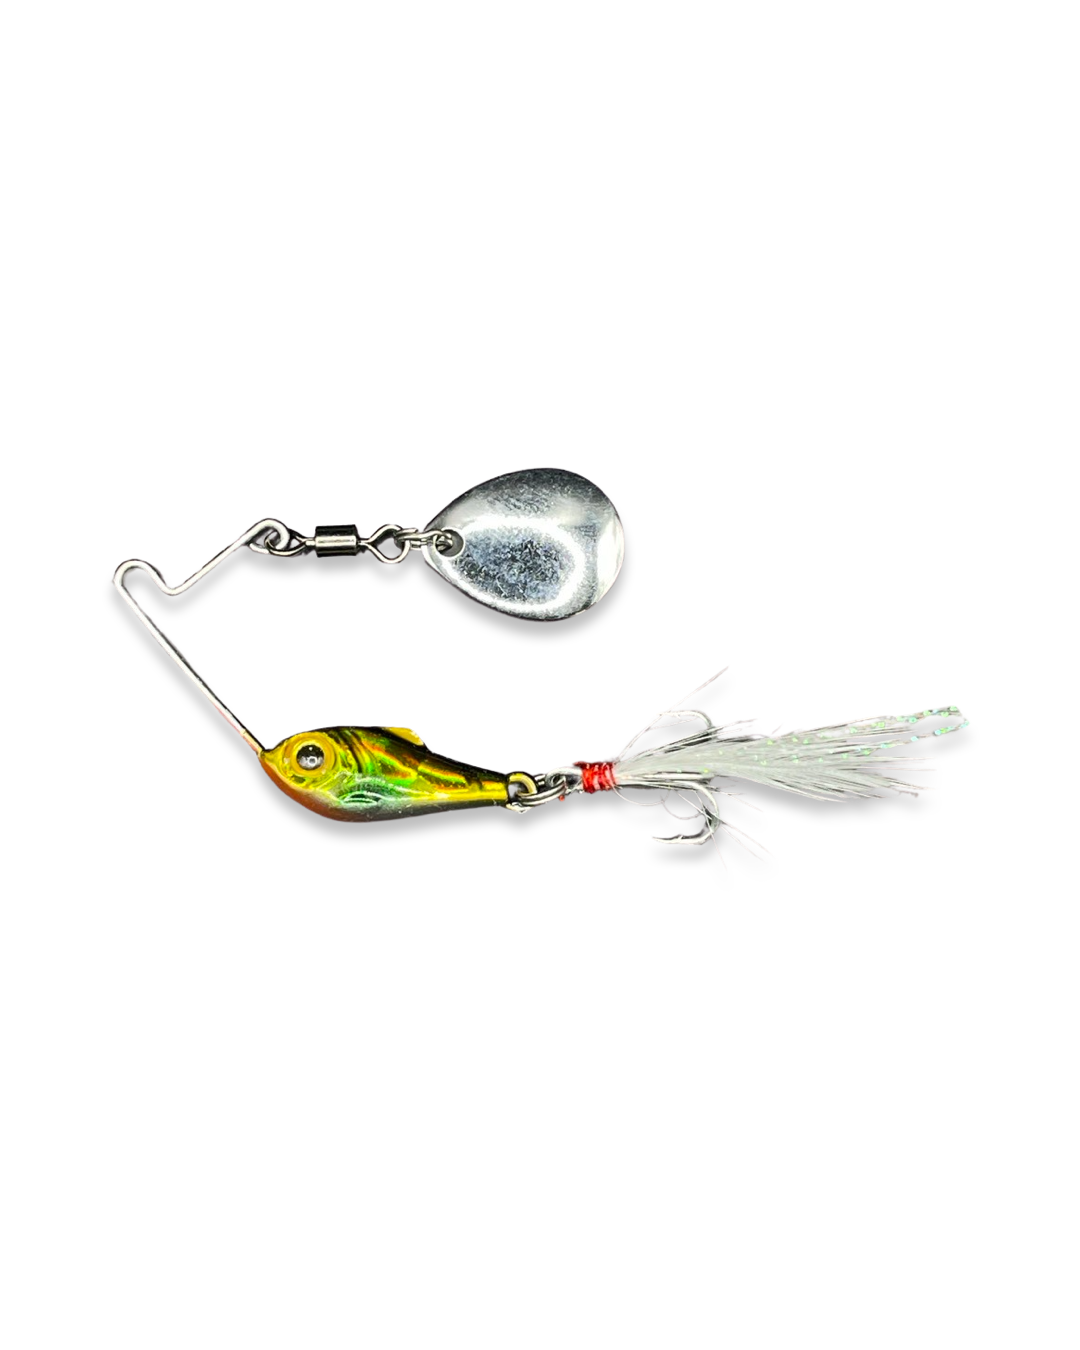 Baits Lures Spinnerbait Fishing Lure Hard Buzz Flash Baits Spinner